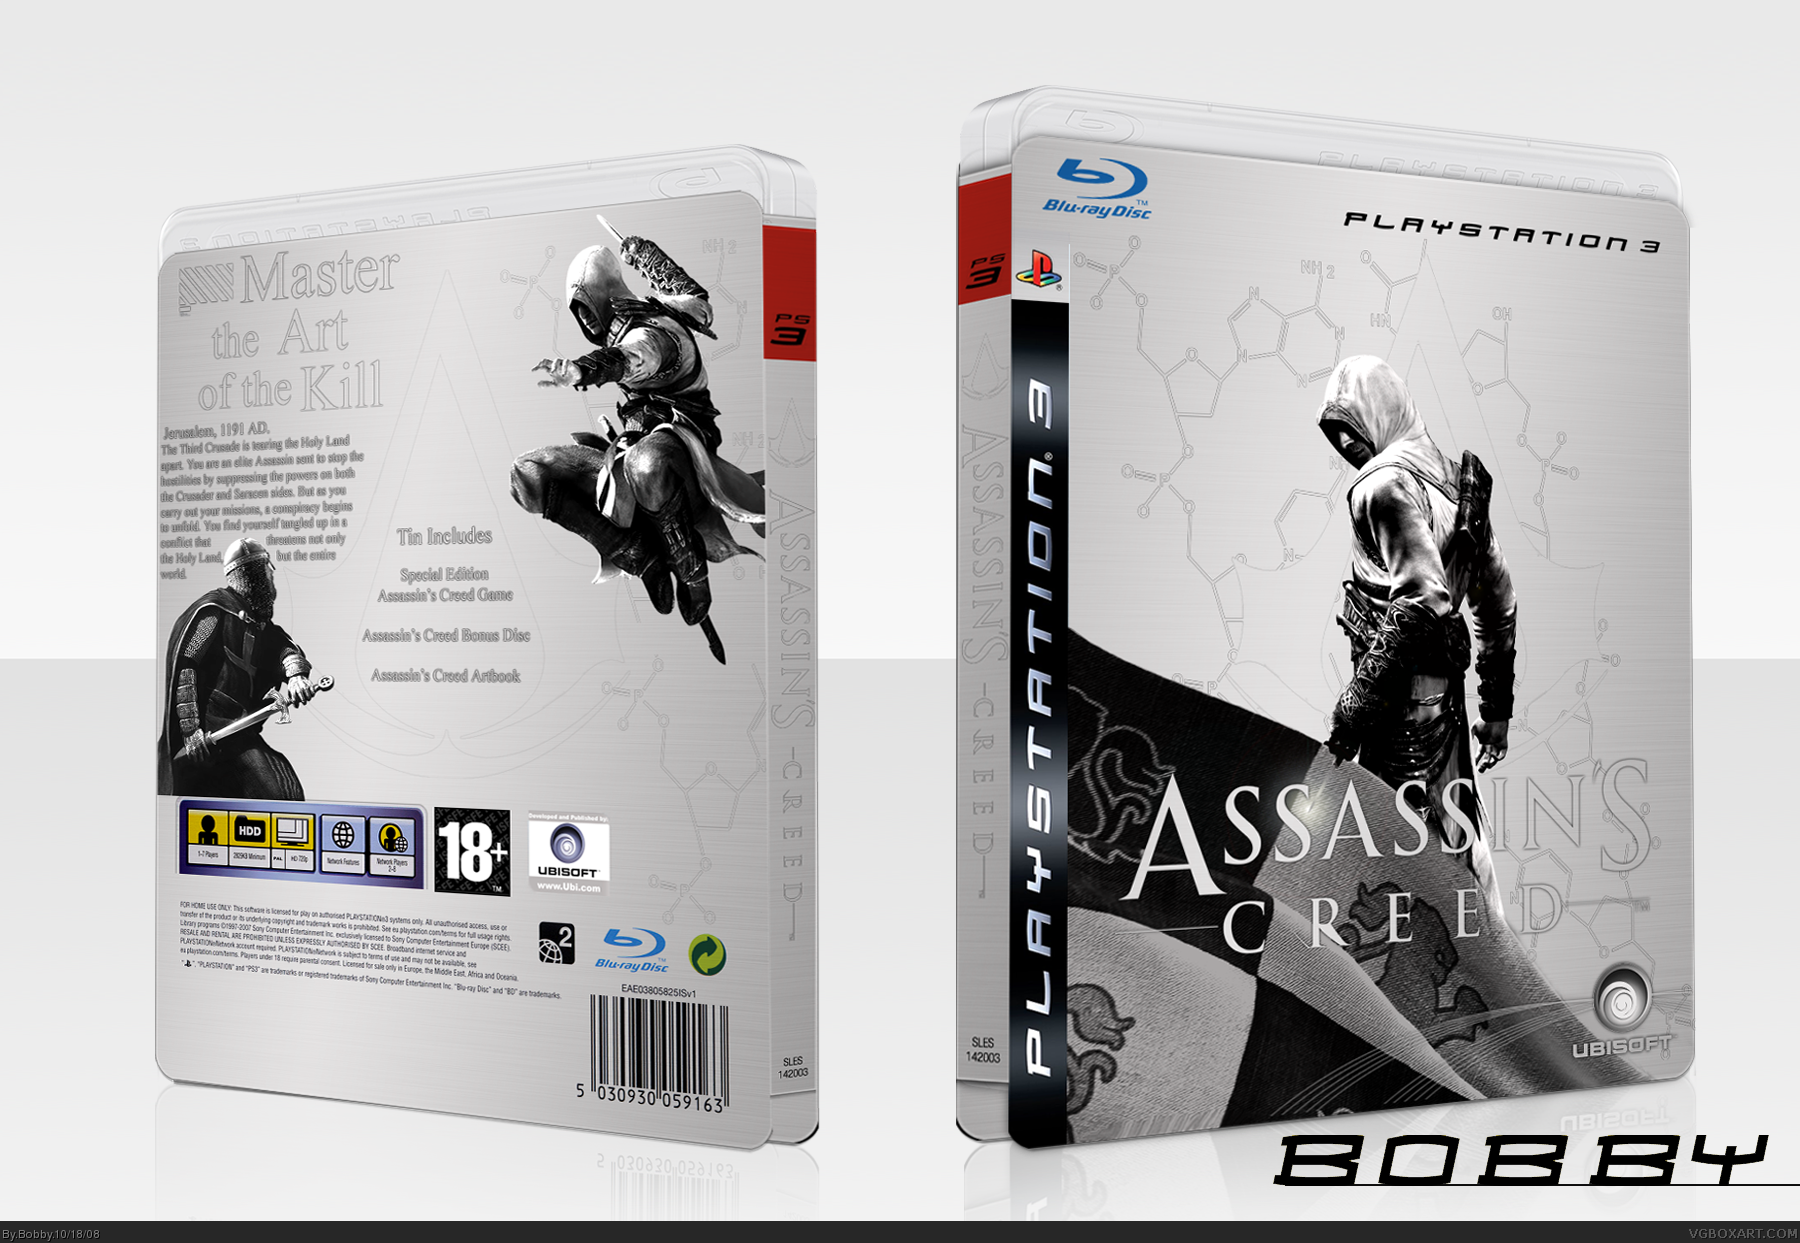 Assassin's Creed Special Edition box cover